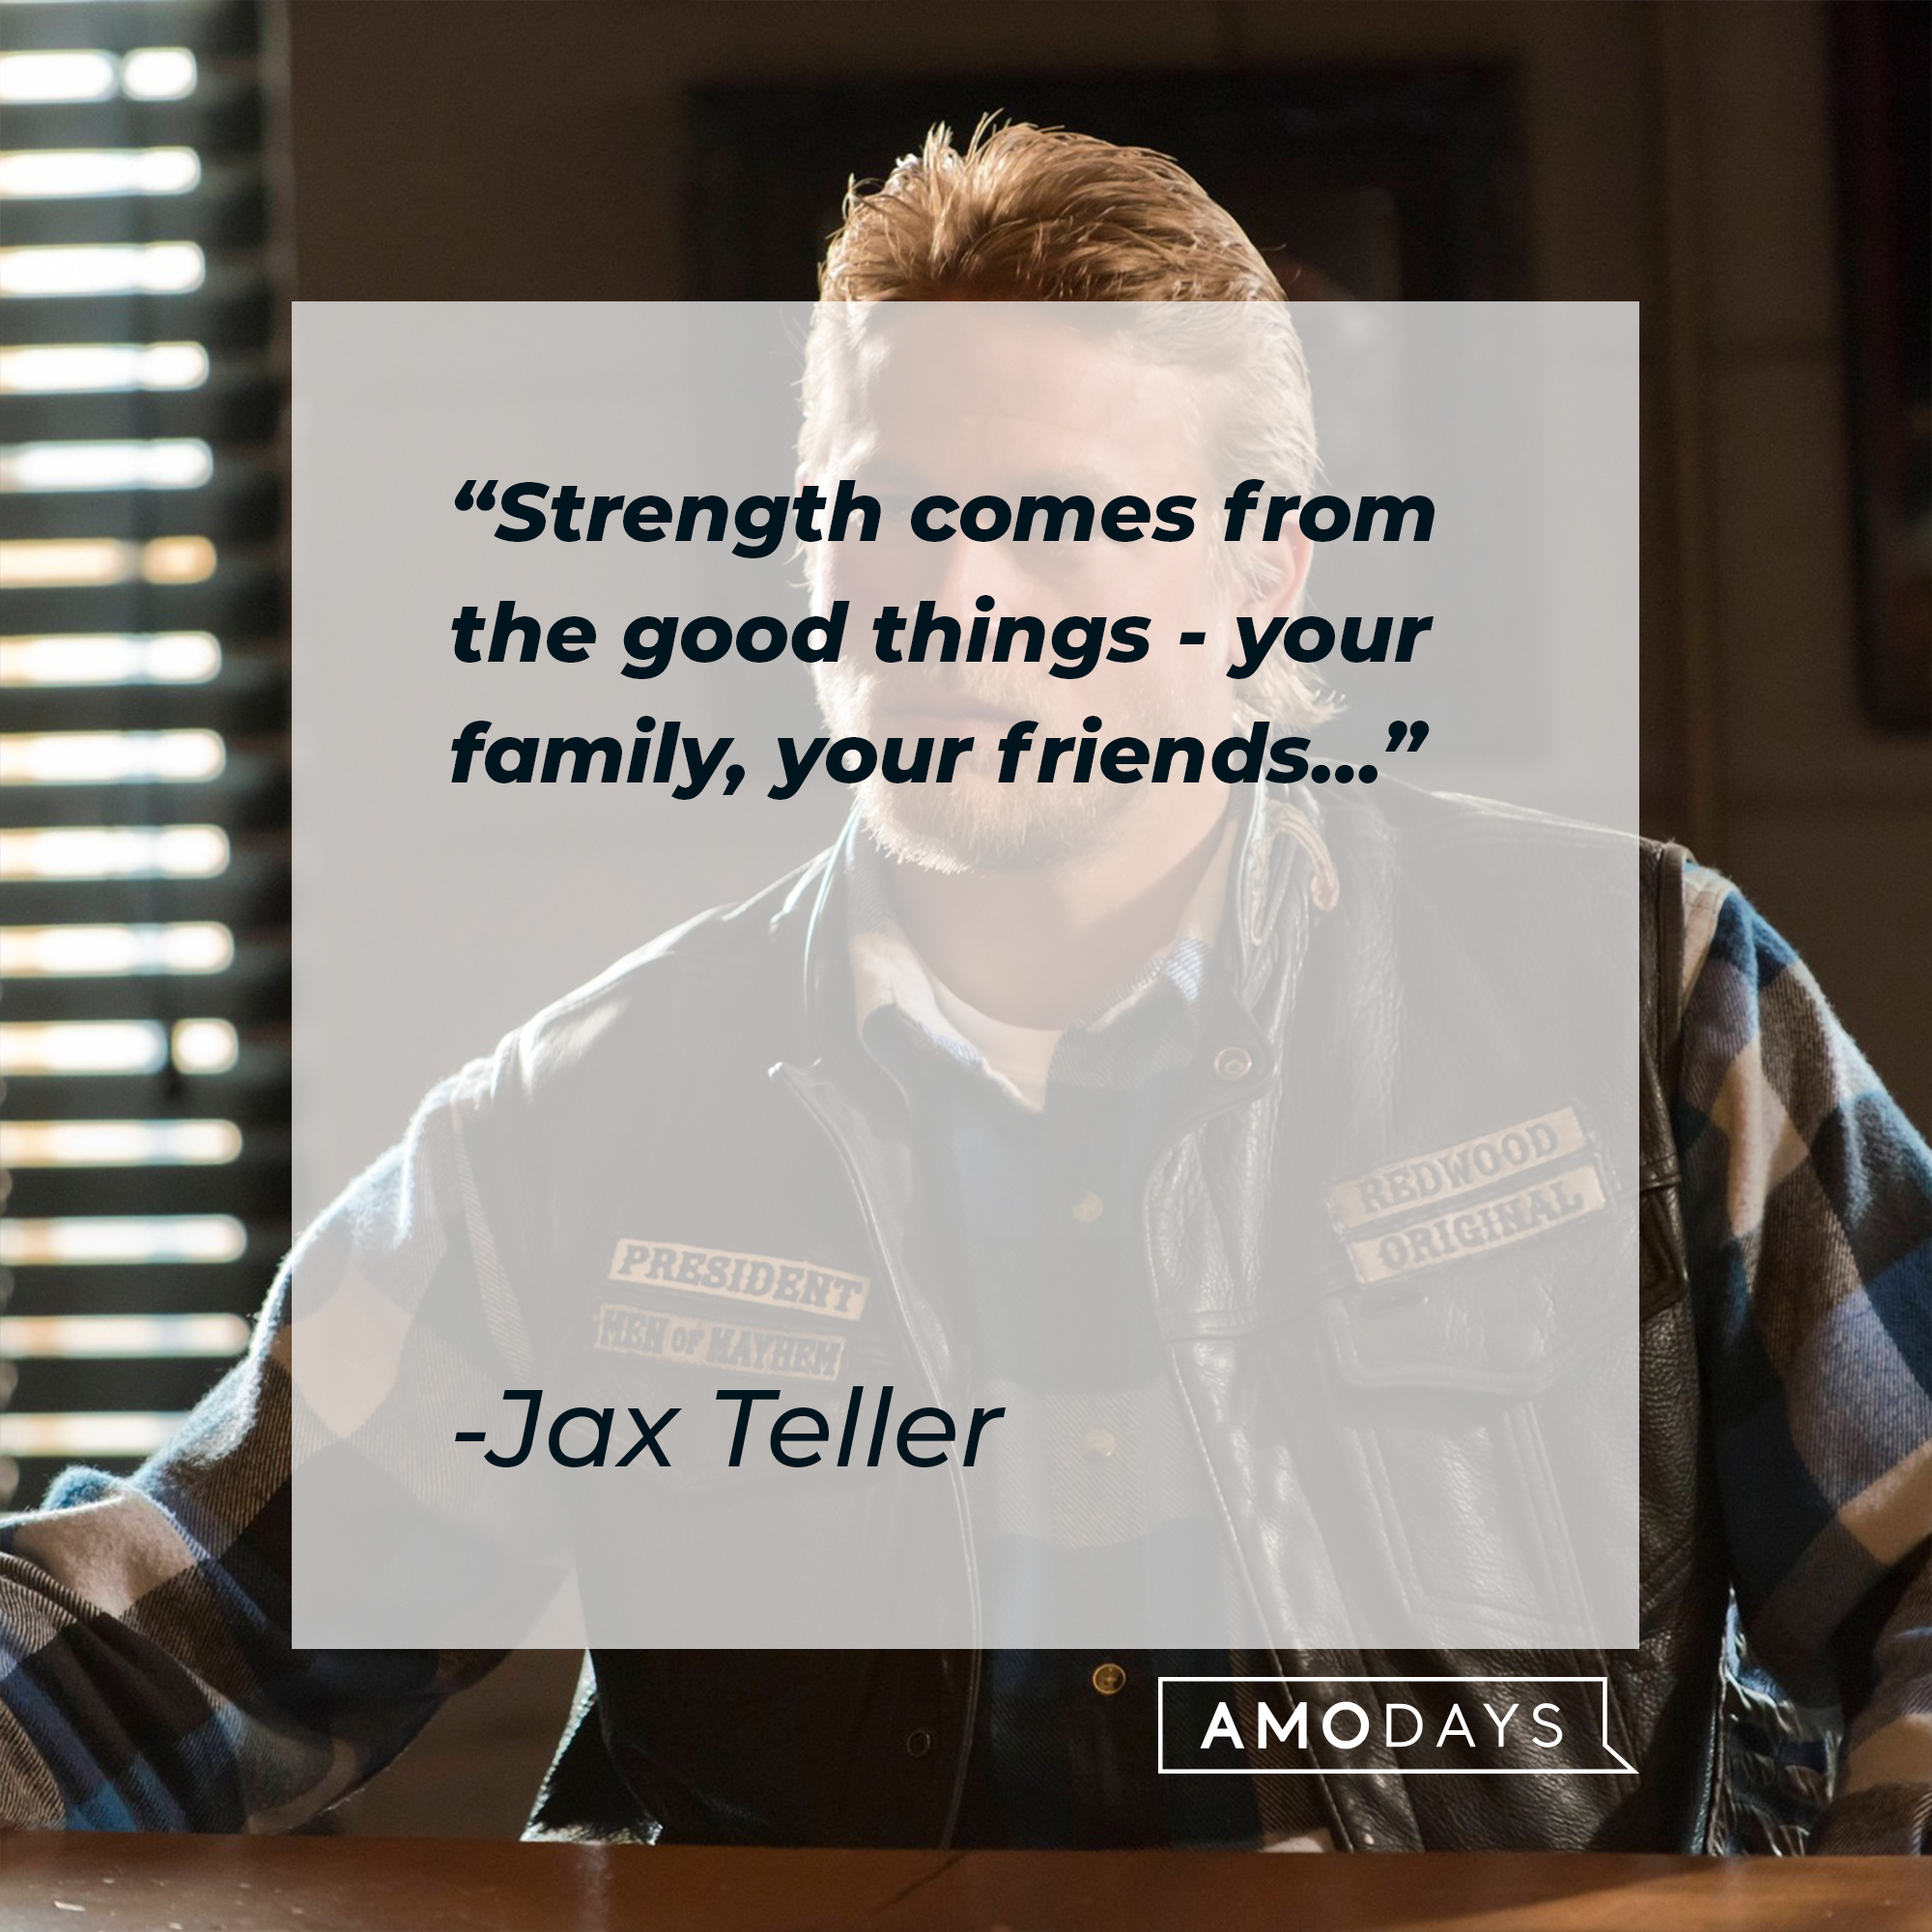 Jax Teller with his quote: "Strength comes from the good things - your family, your friends…” |  Source: facebook.com/SonsofAnarchy